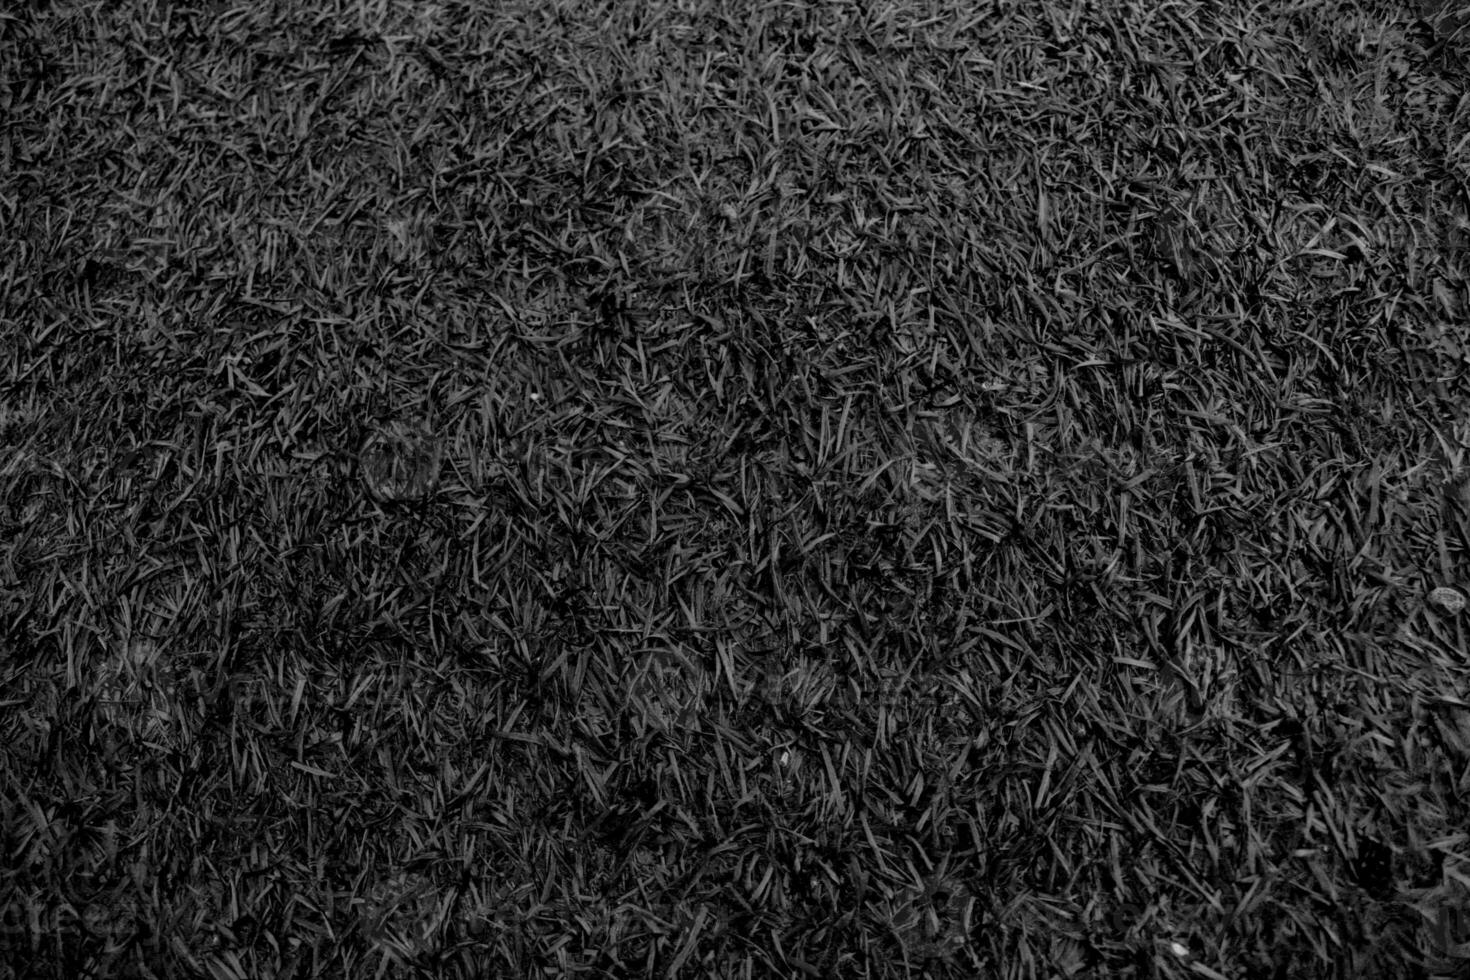 Grunge texture of synthetic grass photo